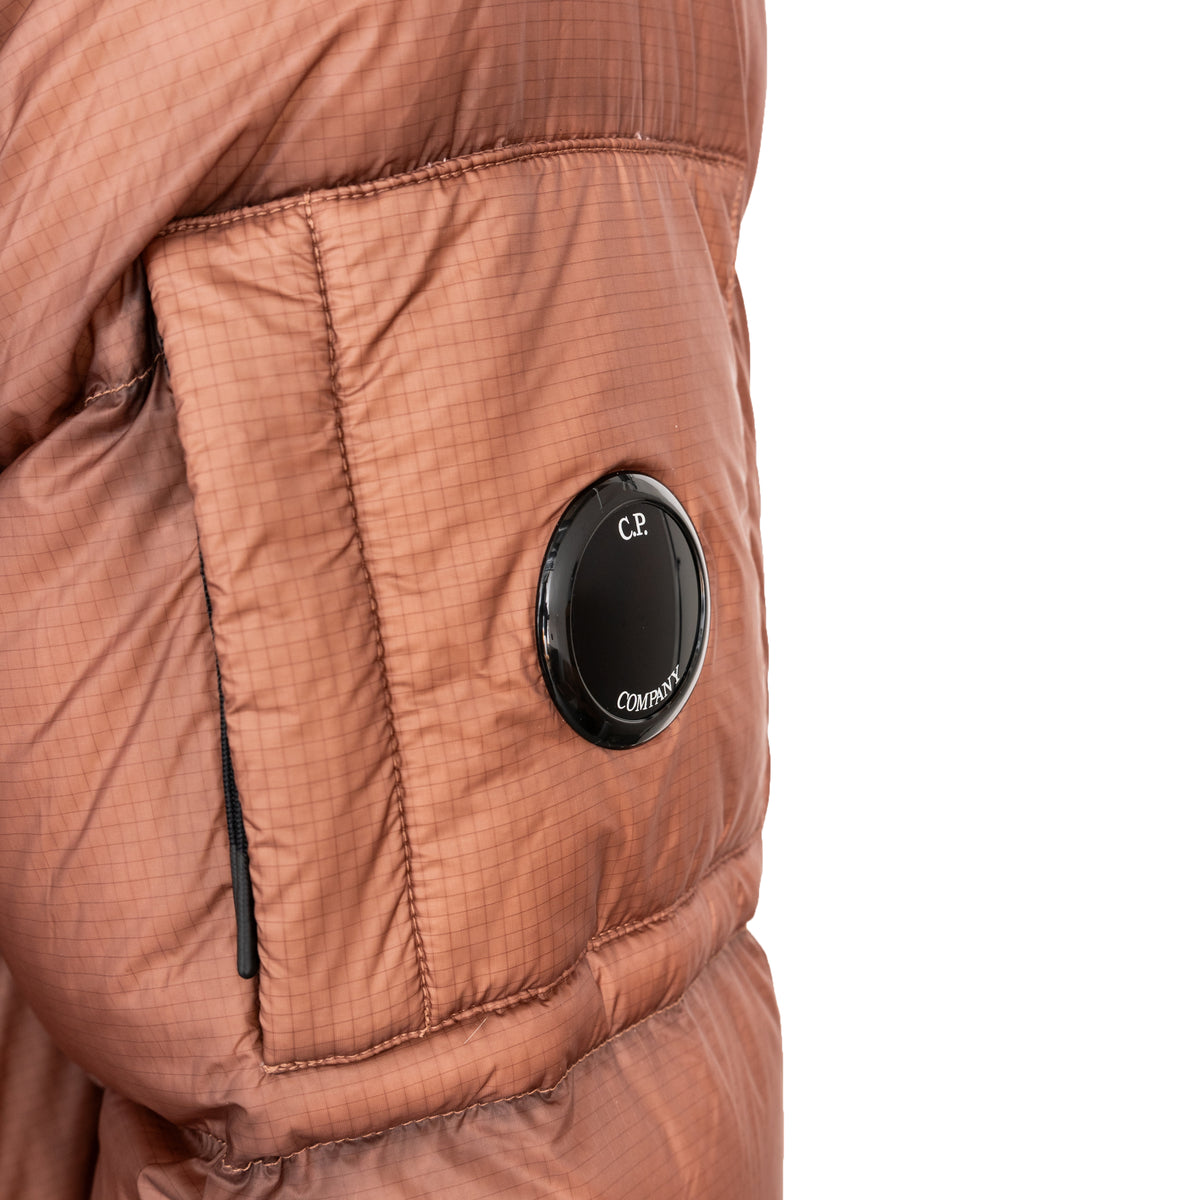 Load image into Gallery viewer, C.P. Company Cedar Wood D.D. SHELL Hooded Down Jacket
